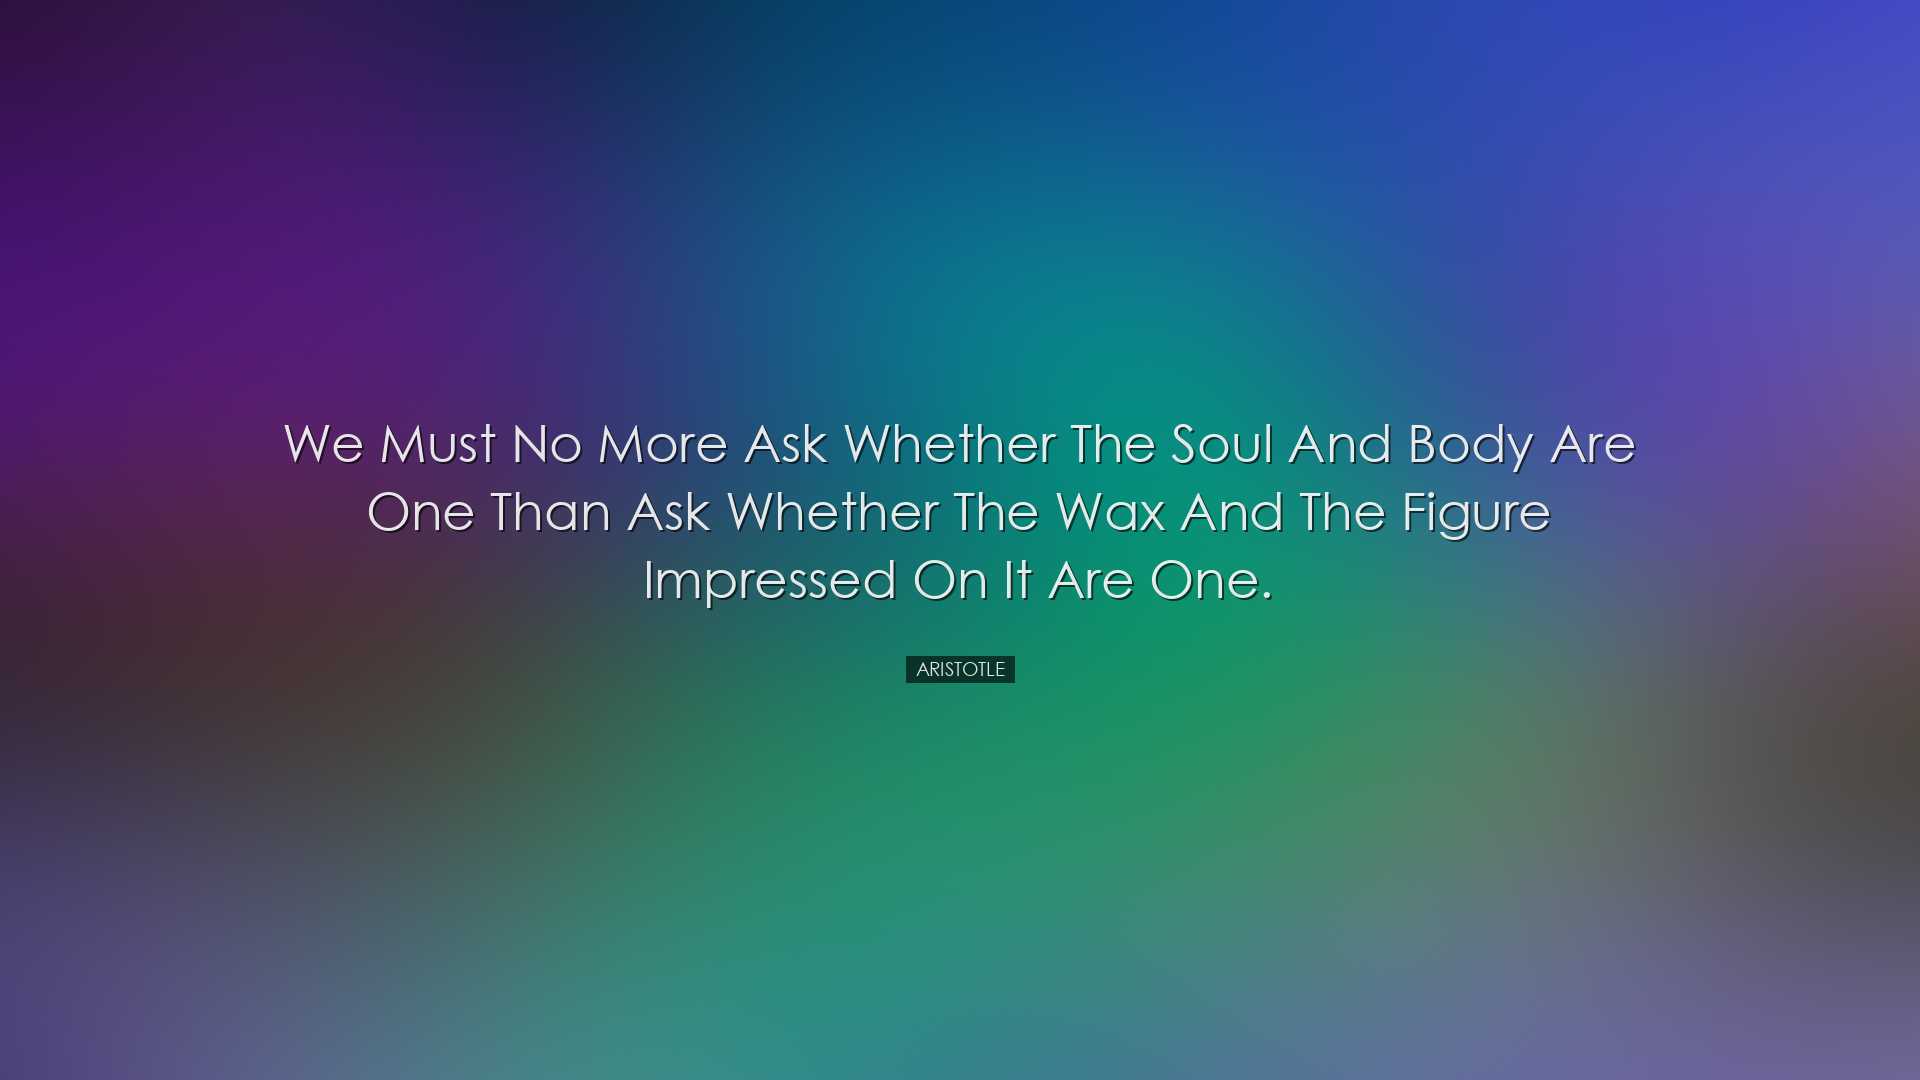 We must no more ask whether the soul and body are one than ask whe